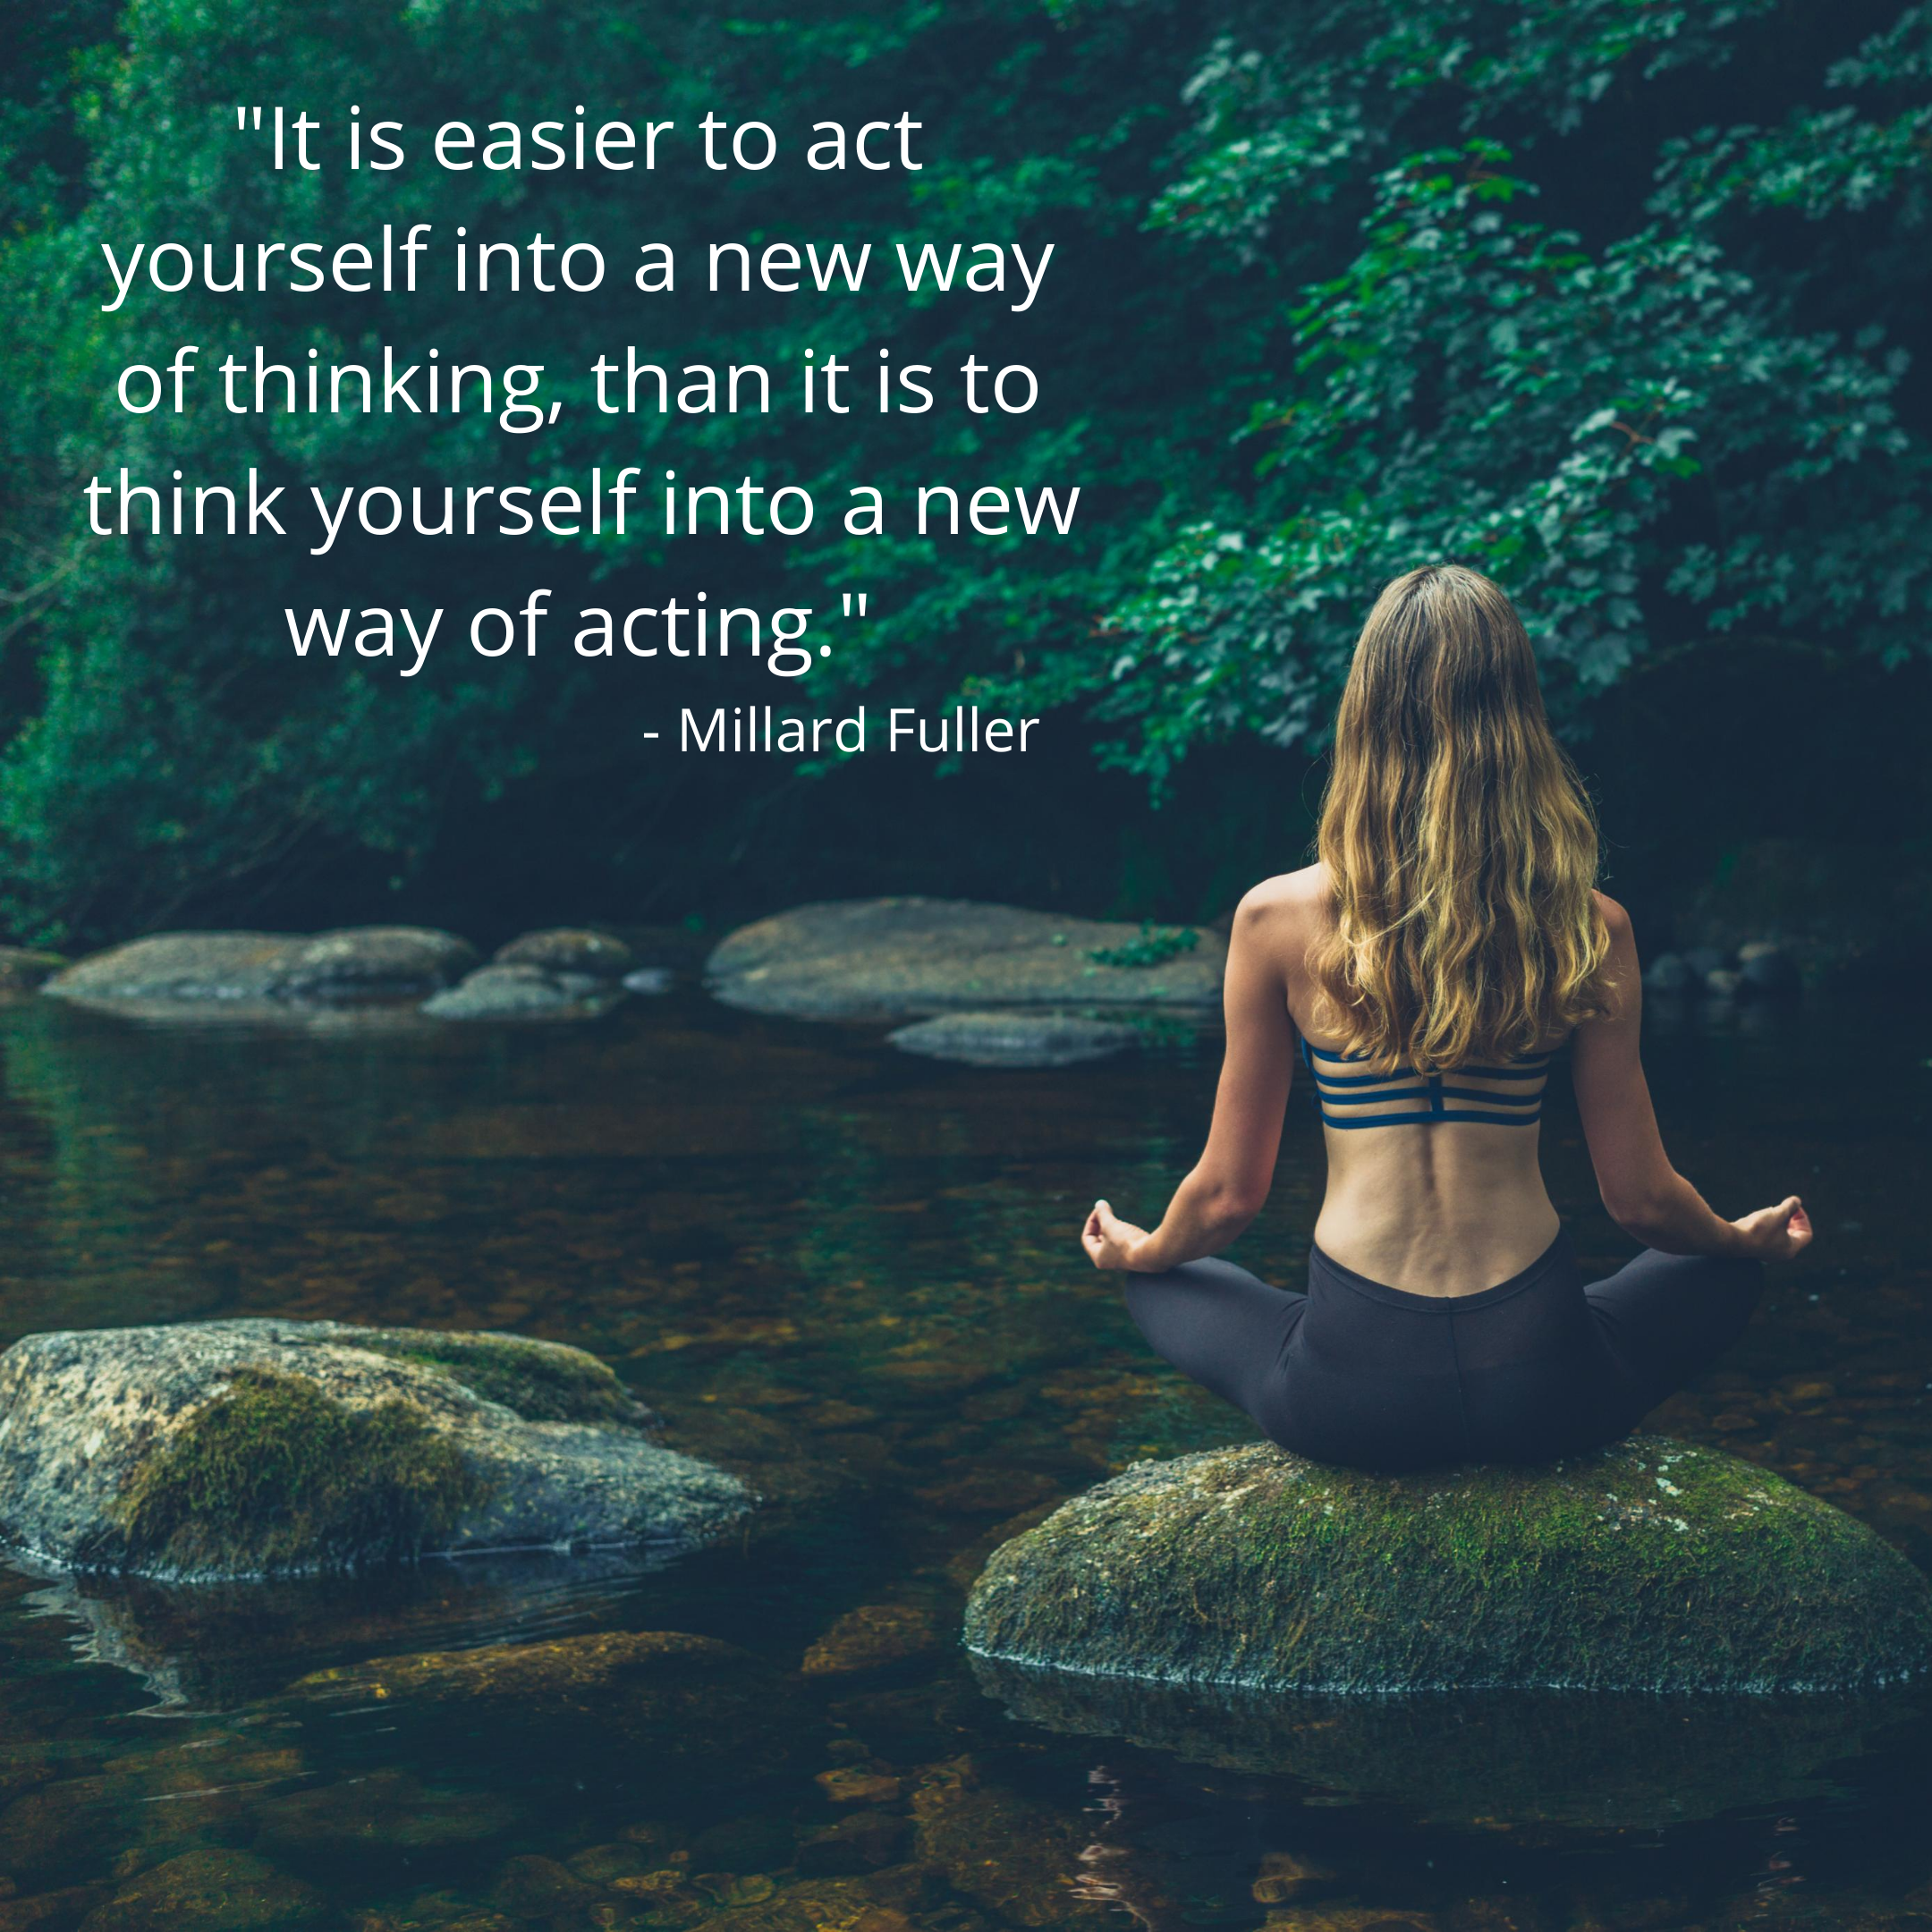 Zitat Millard Fuller It is easier to act yourself into a new way of thinking, than it is to think yourself into a new way of acting